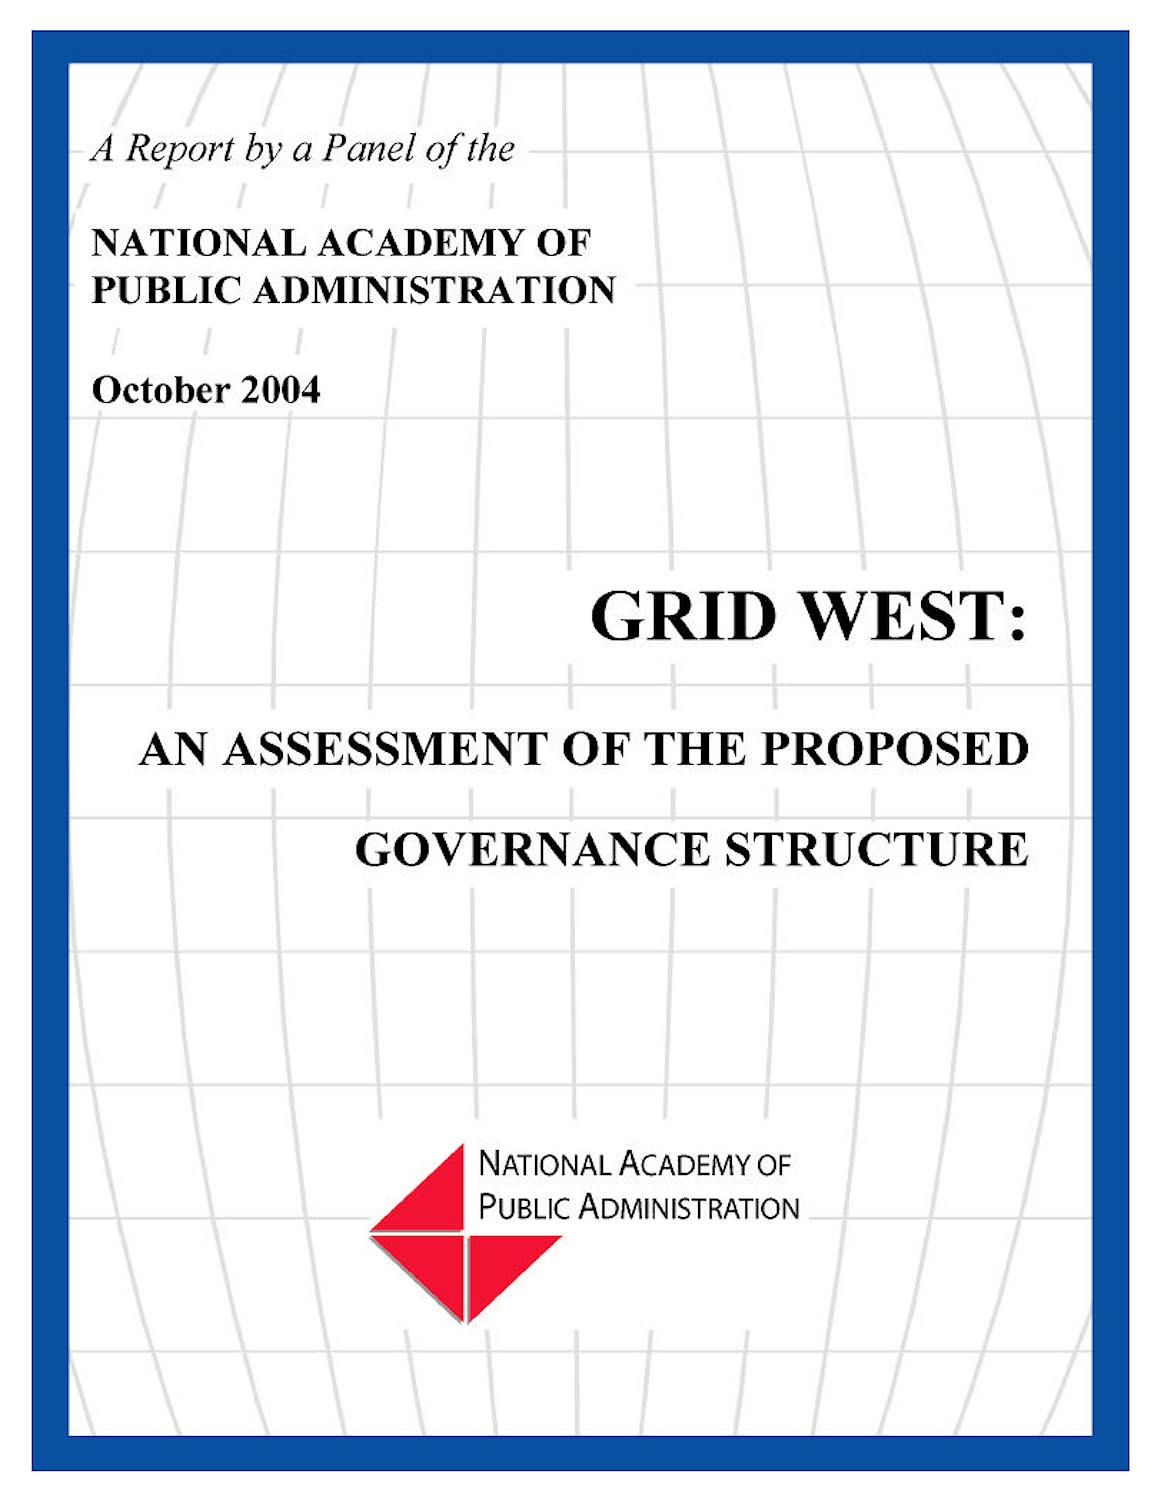 04 13 Grid Westan Assessmentofthe Proposed Governance Structure